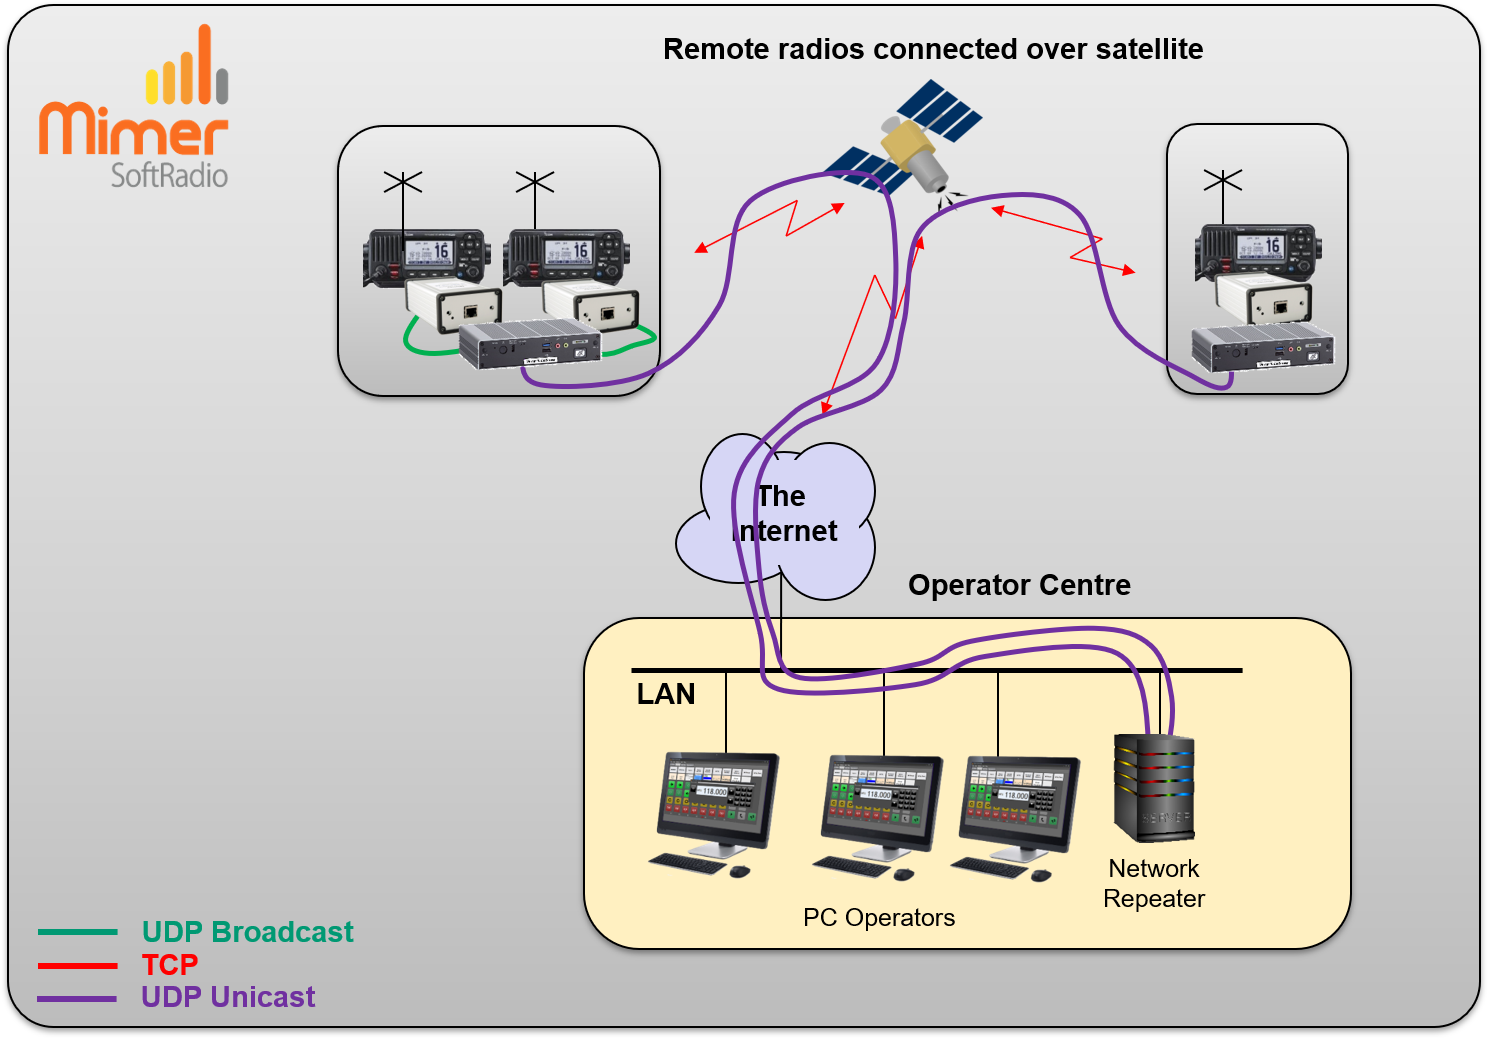 RadioServer offshore connects to NetworkRepeater onshore with UDP Unicast